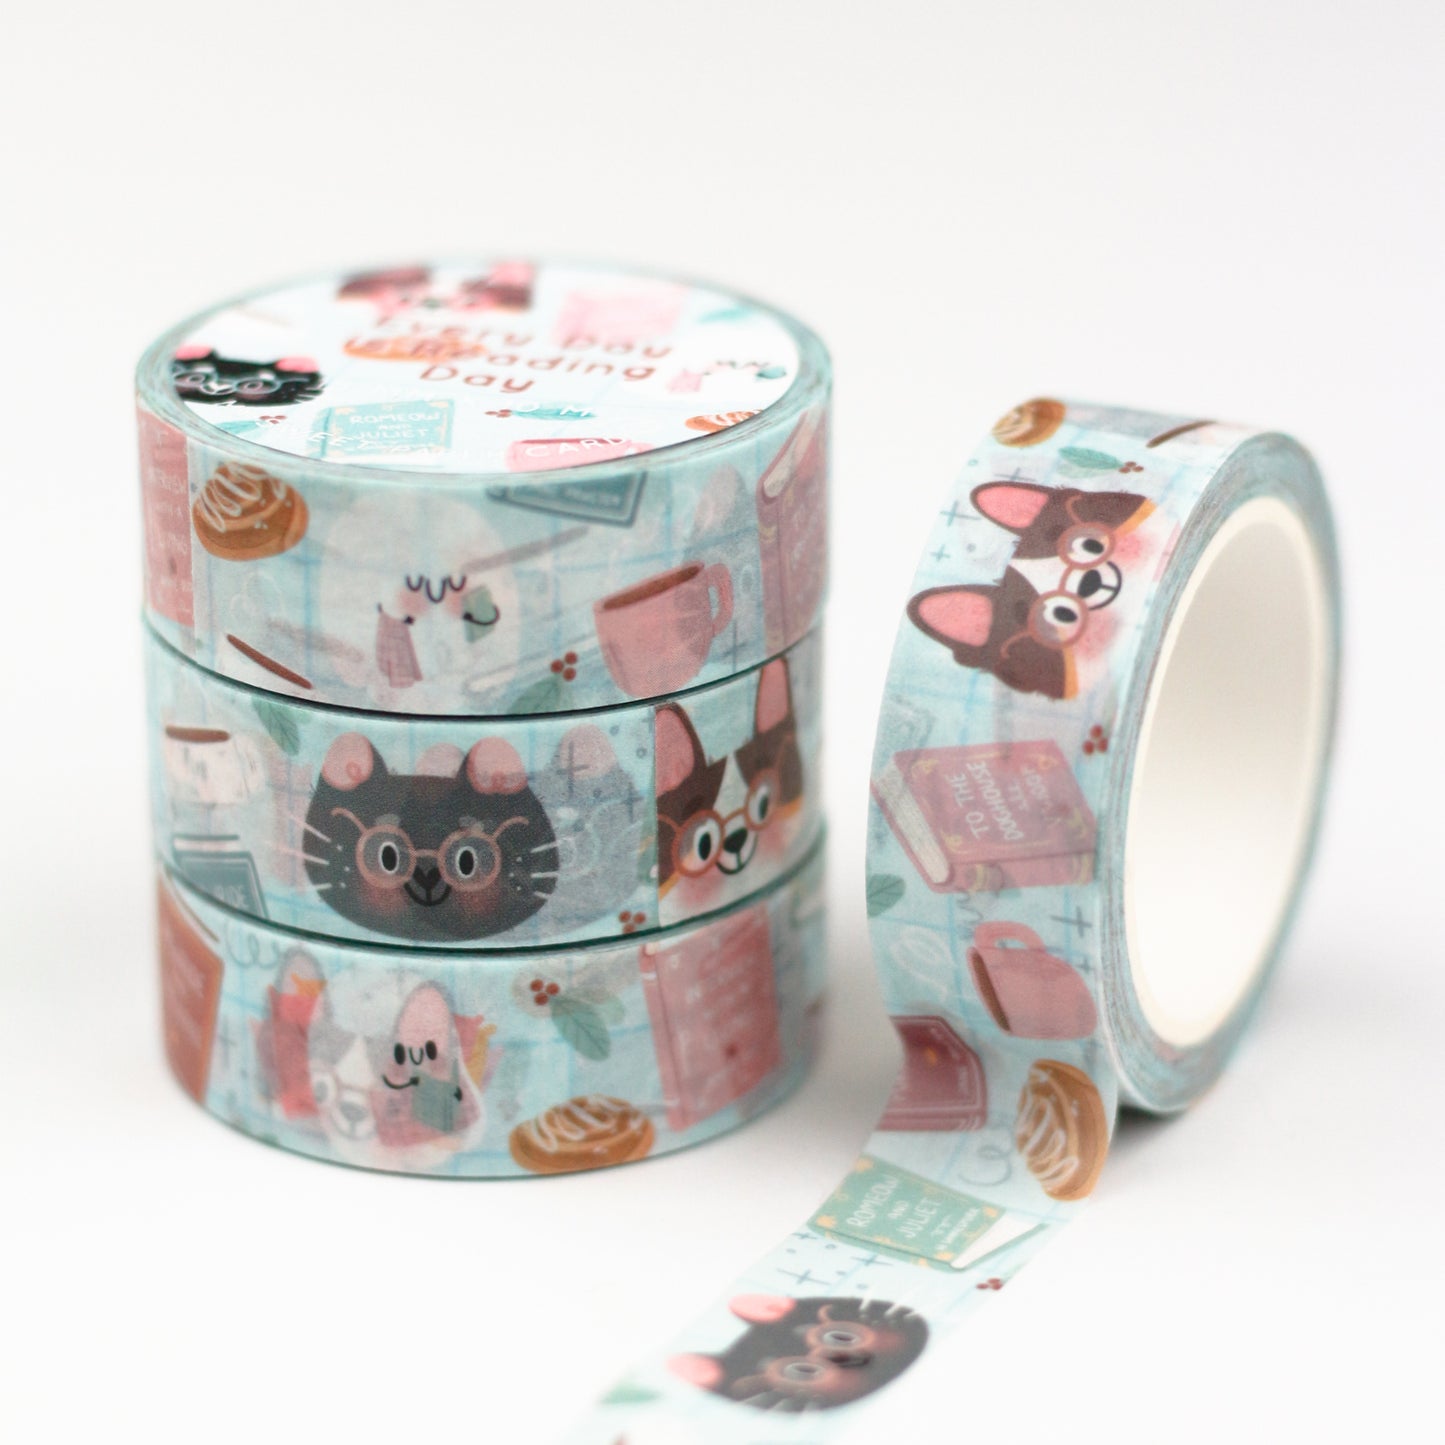 Evey day is reading Day - Washi Tape pour amoureux des livres